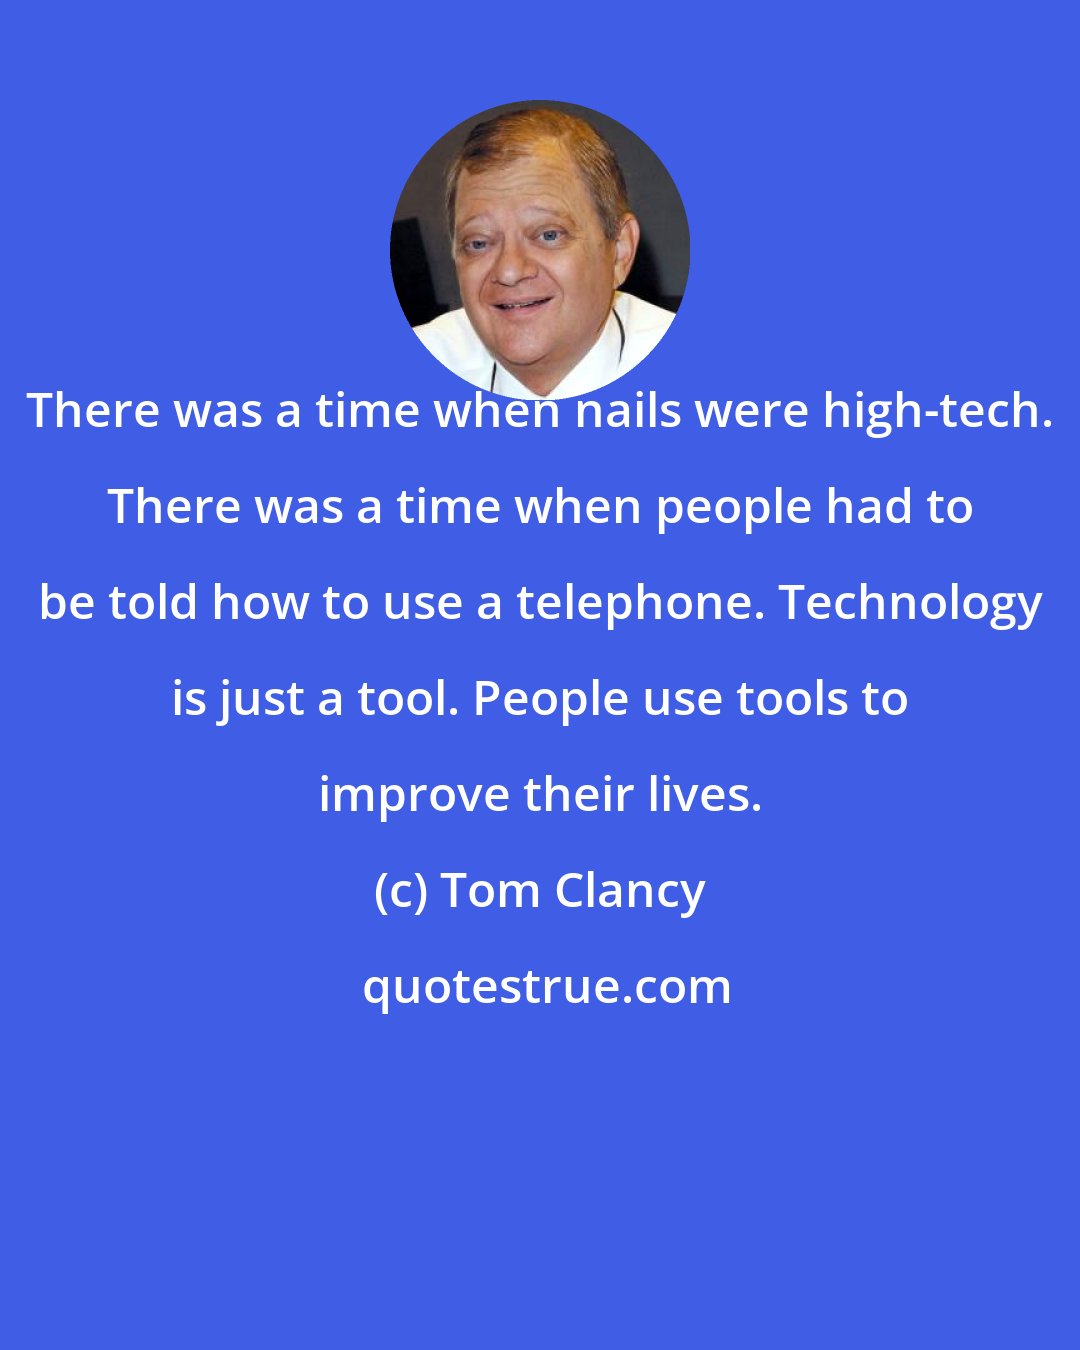 Tom Clancy: There was a time when nails were high-tech. There was a time when people had to be told how to use a telephone. Technology is just a tool. People use tools to improve their lives.